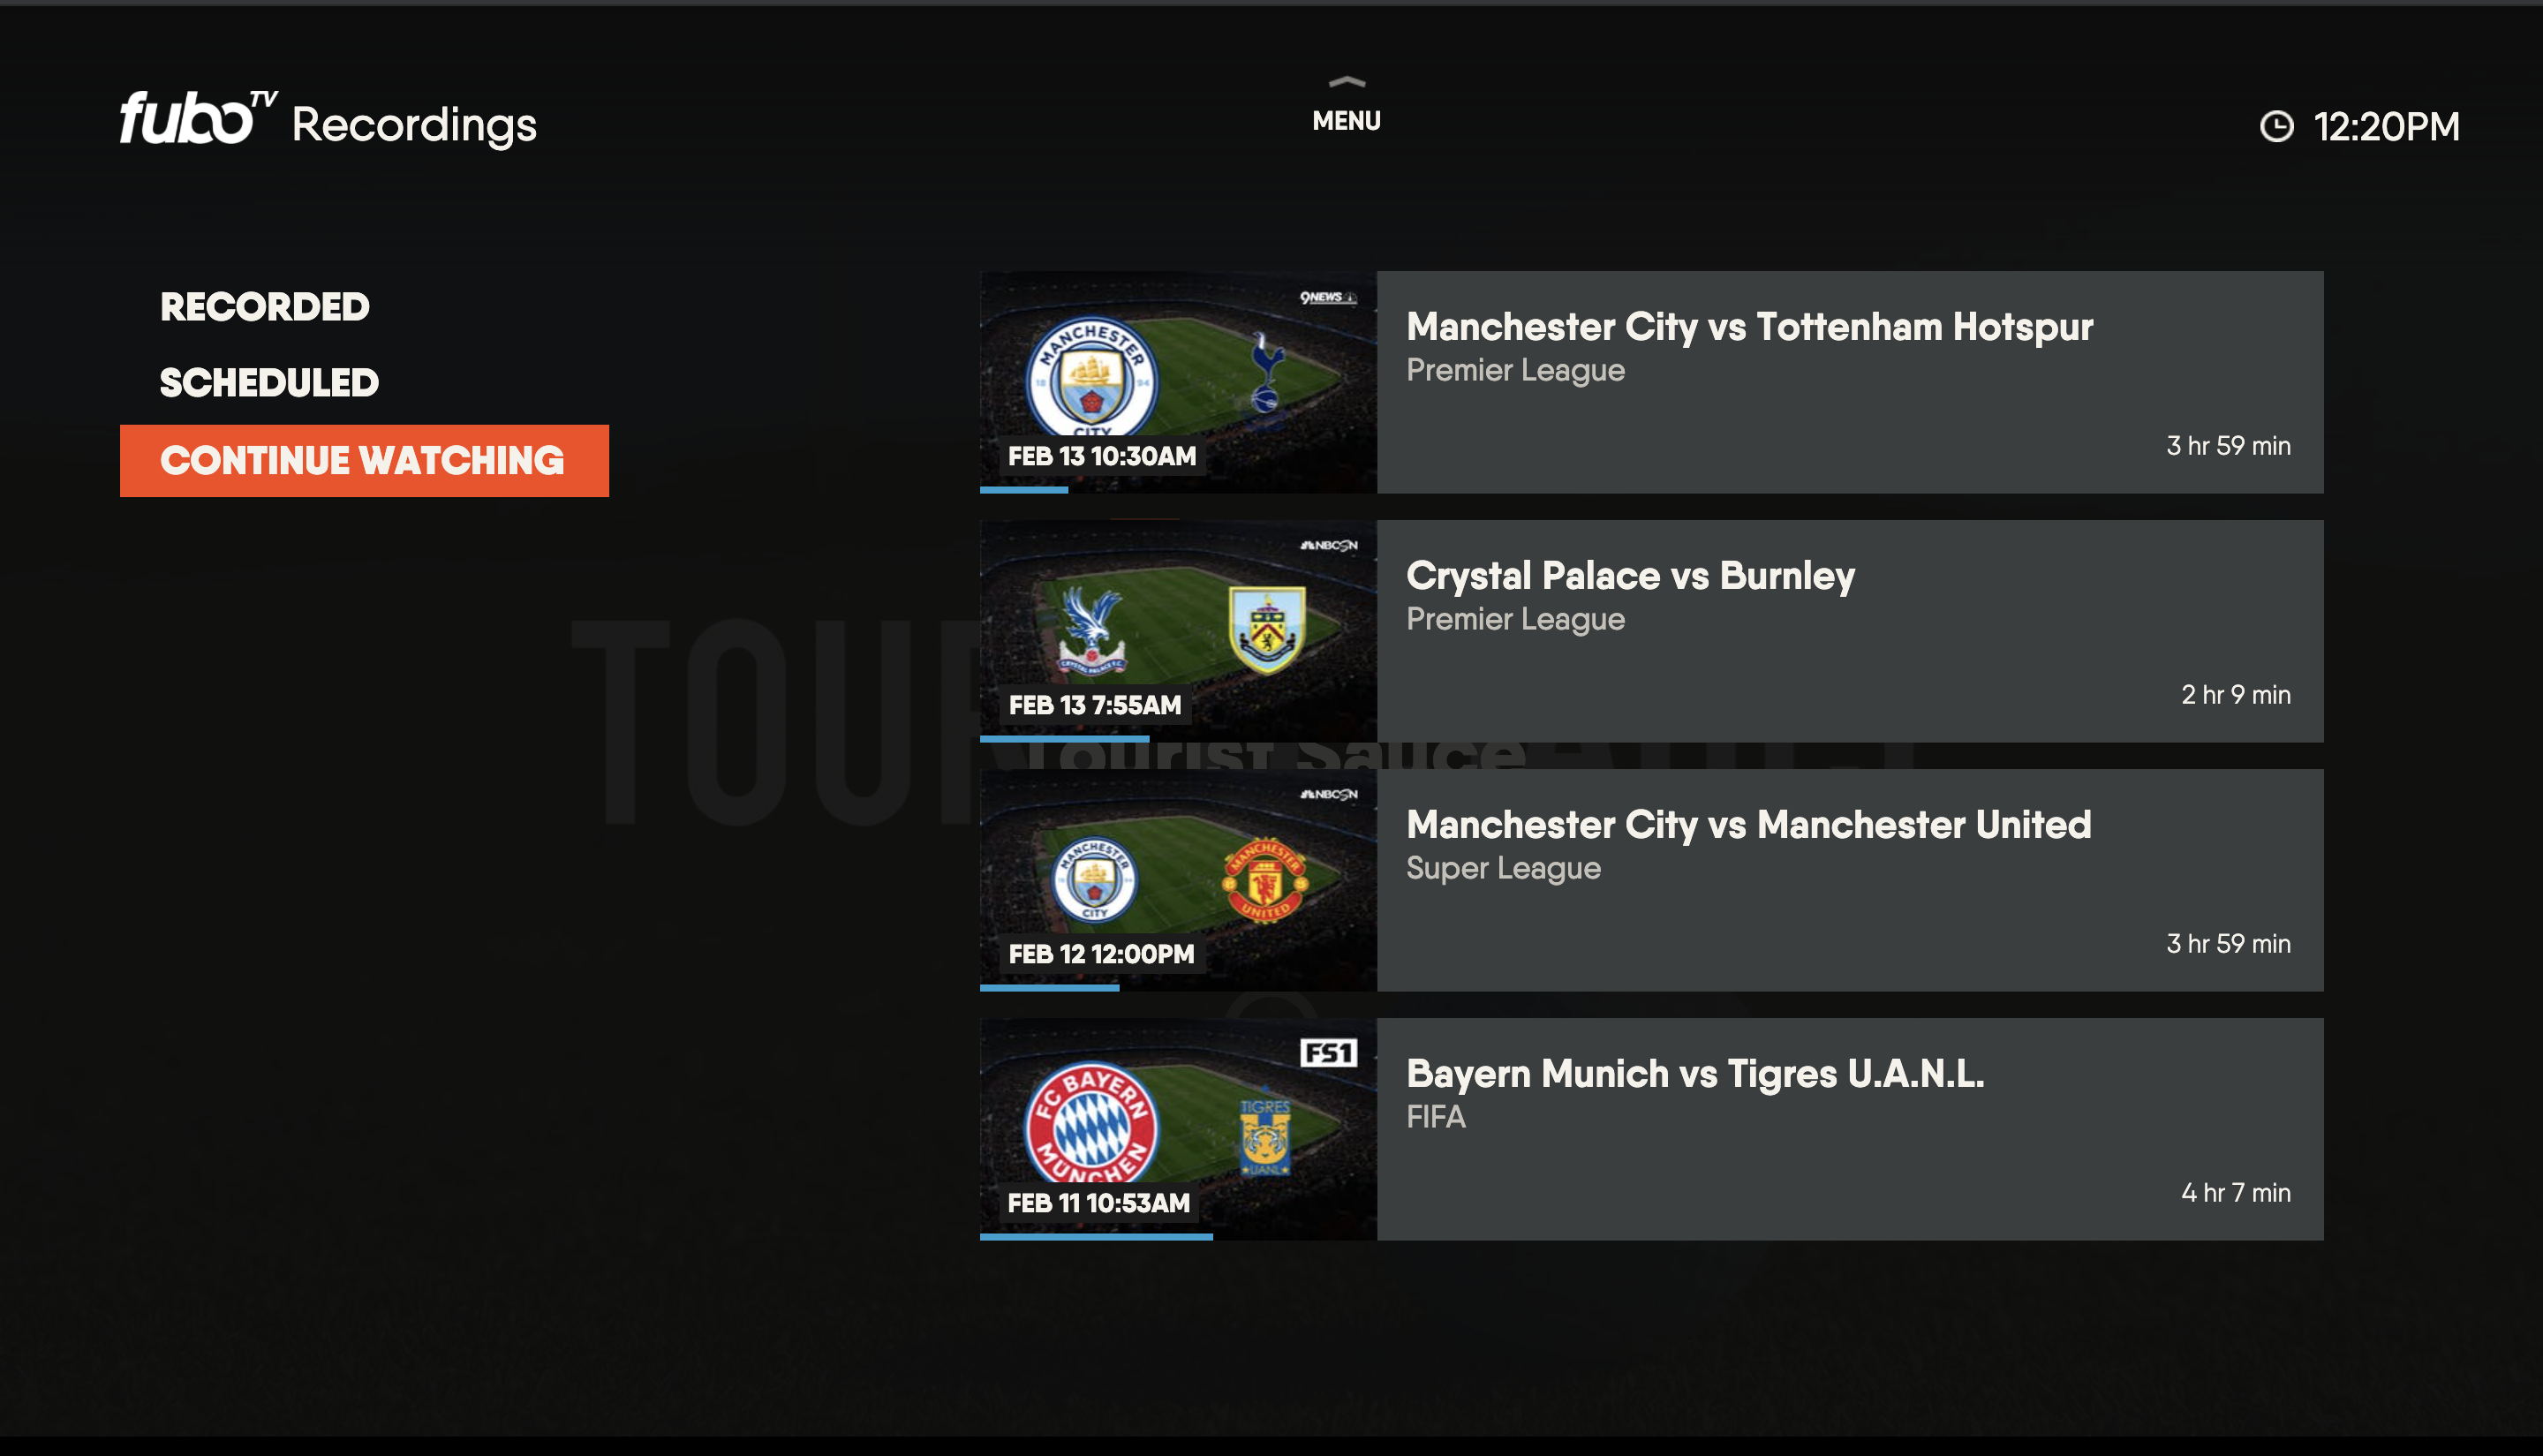 Previously viewed programming on the MY STUFF screen from the FuboTV app for Xbox